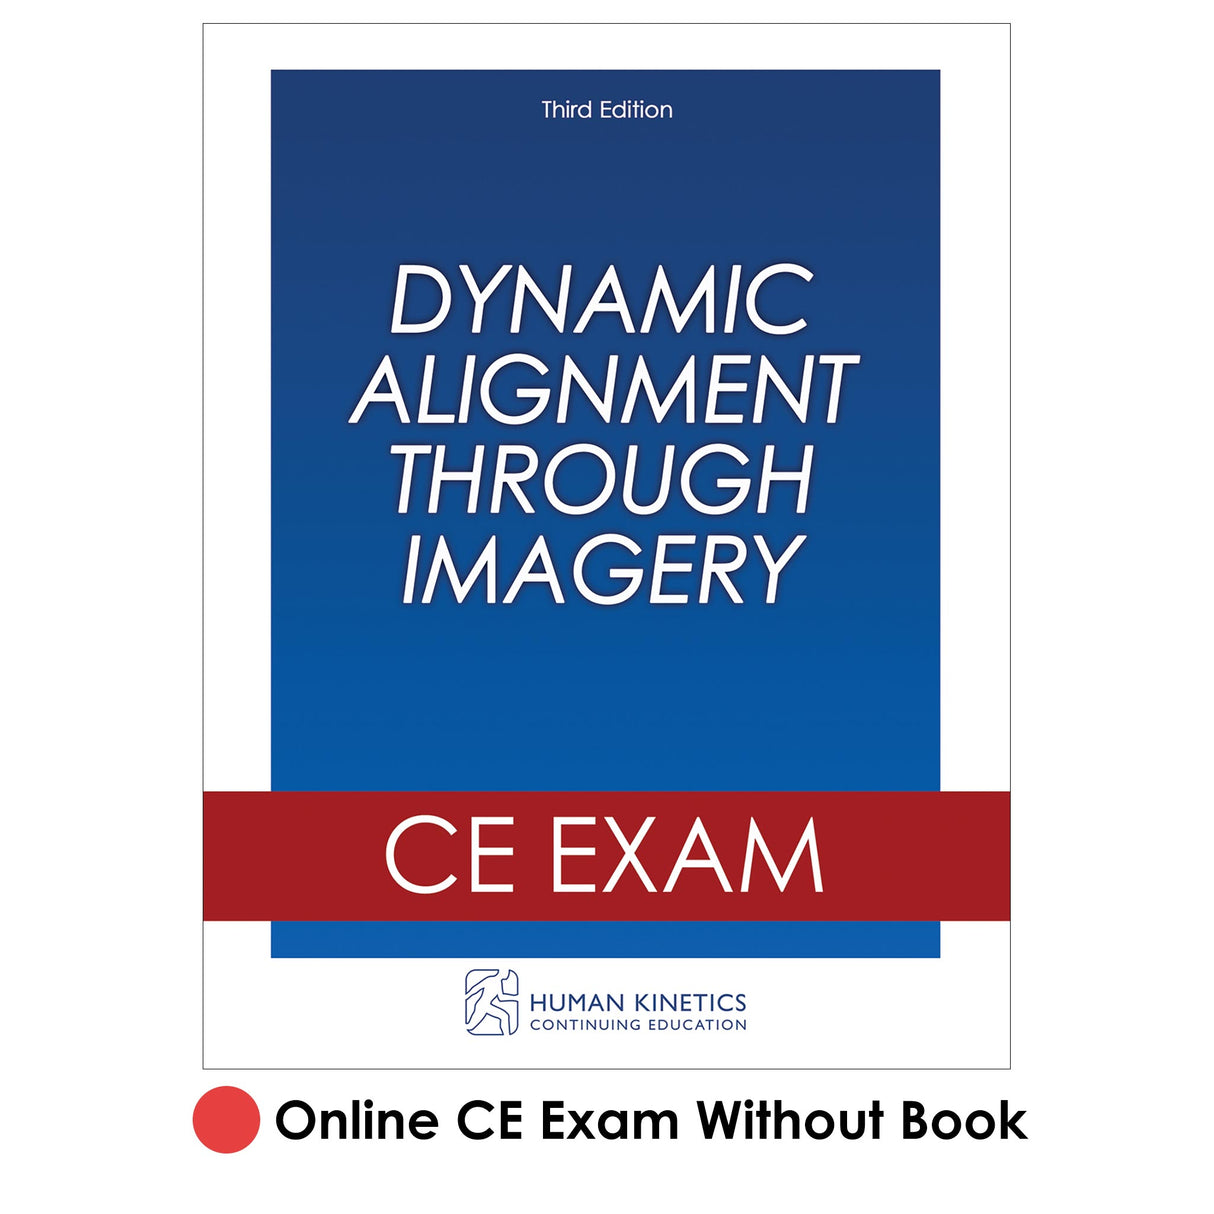 Dynamic Alignment Through Imagery 3rd Edition Online CE Exam Without Book